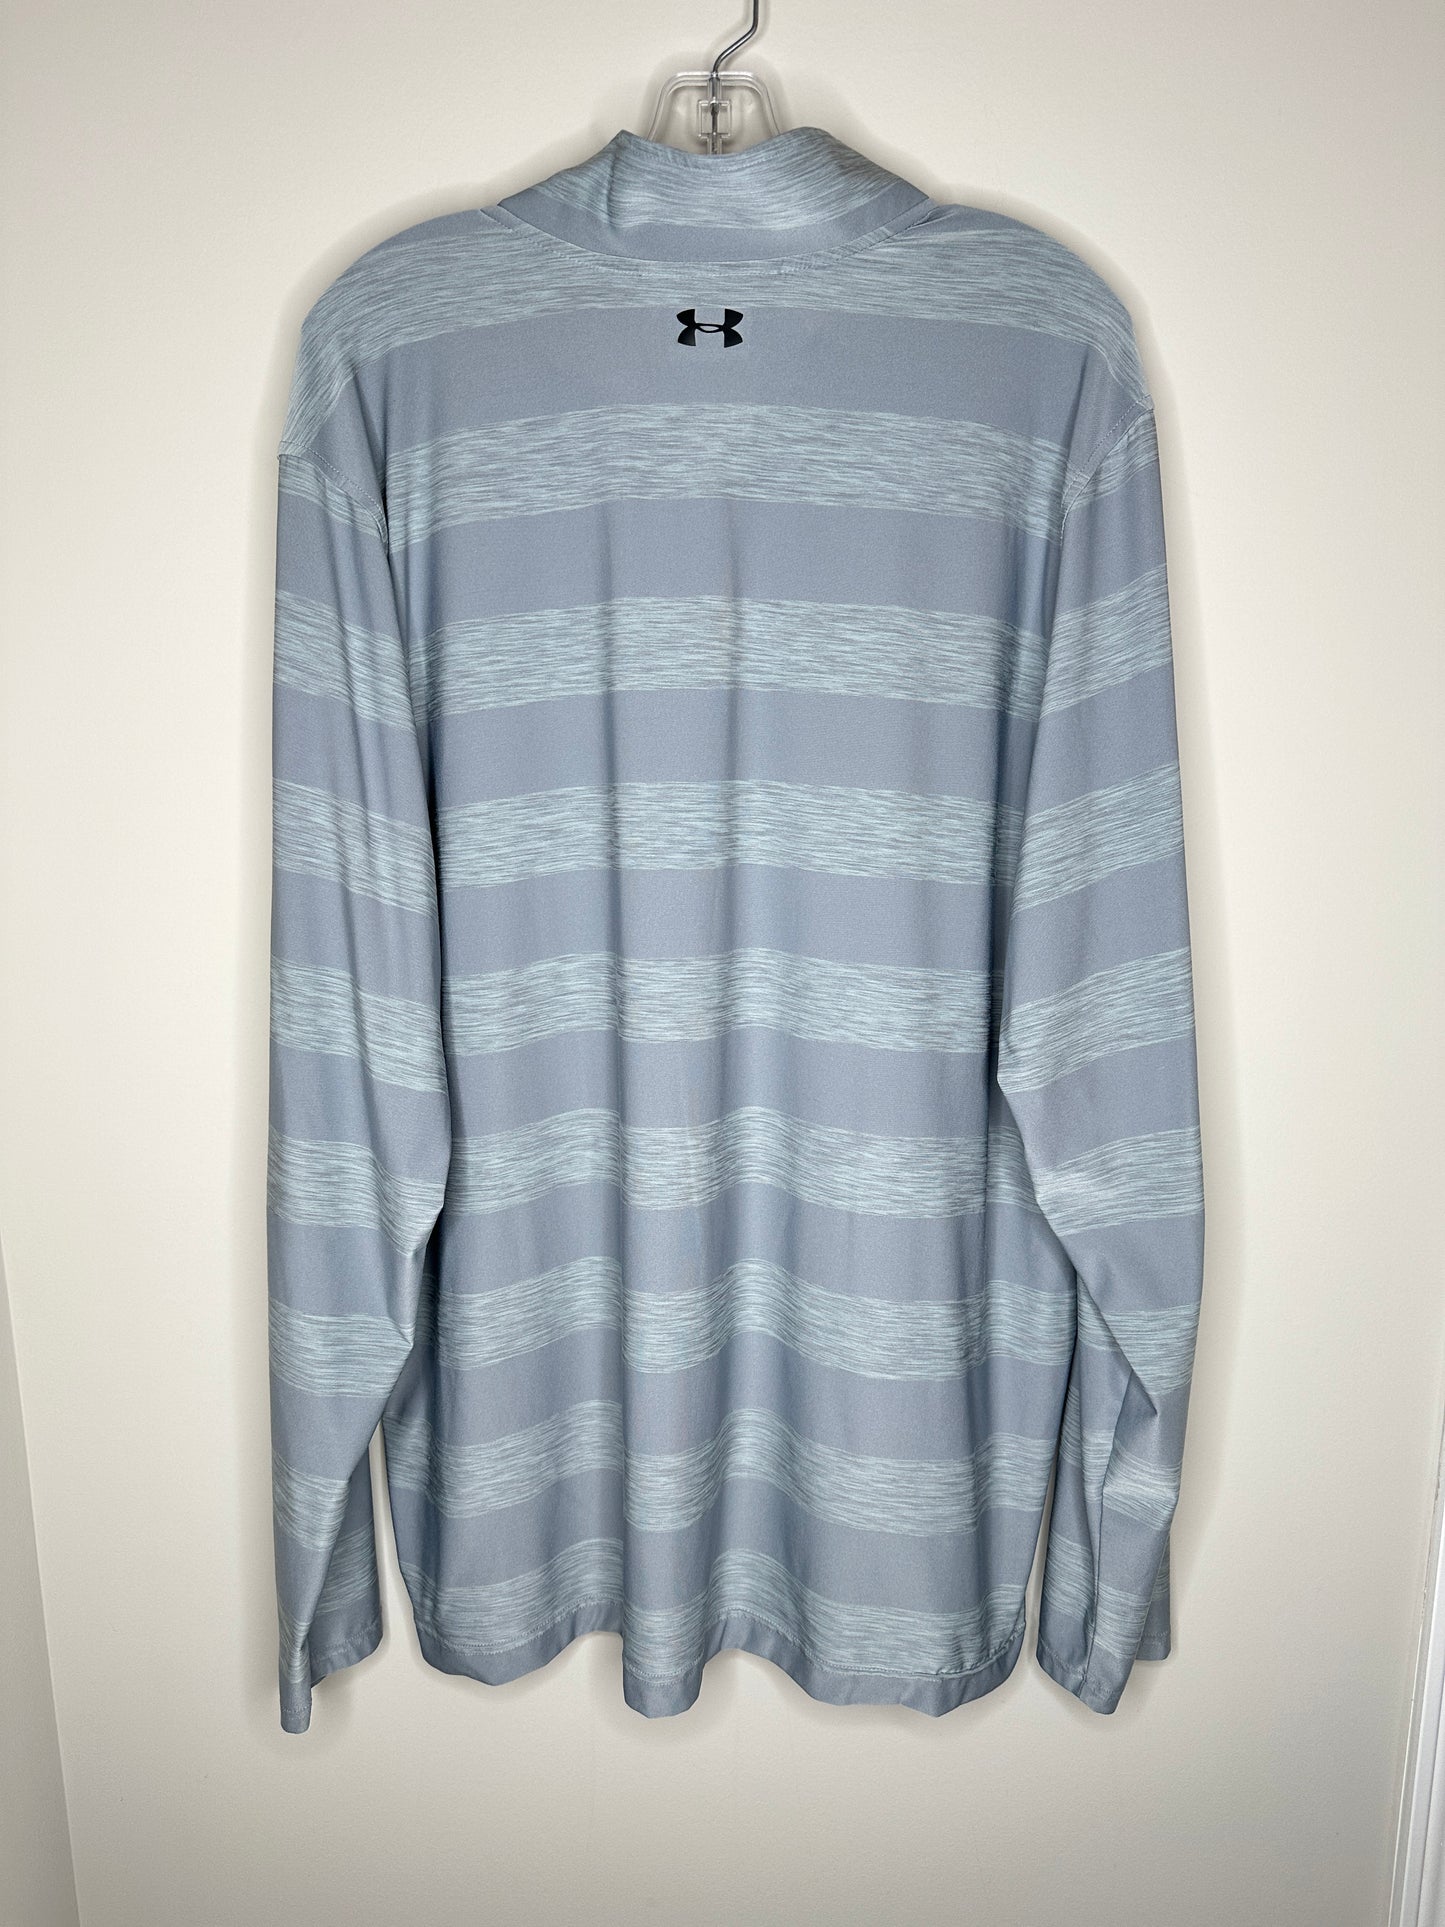 Under Armour Men's Size 2XL Gray & Gray Heather Striped Loose Long Sleeved 1/4 Zip, EUC